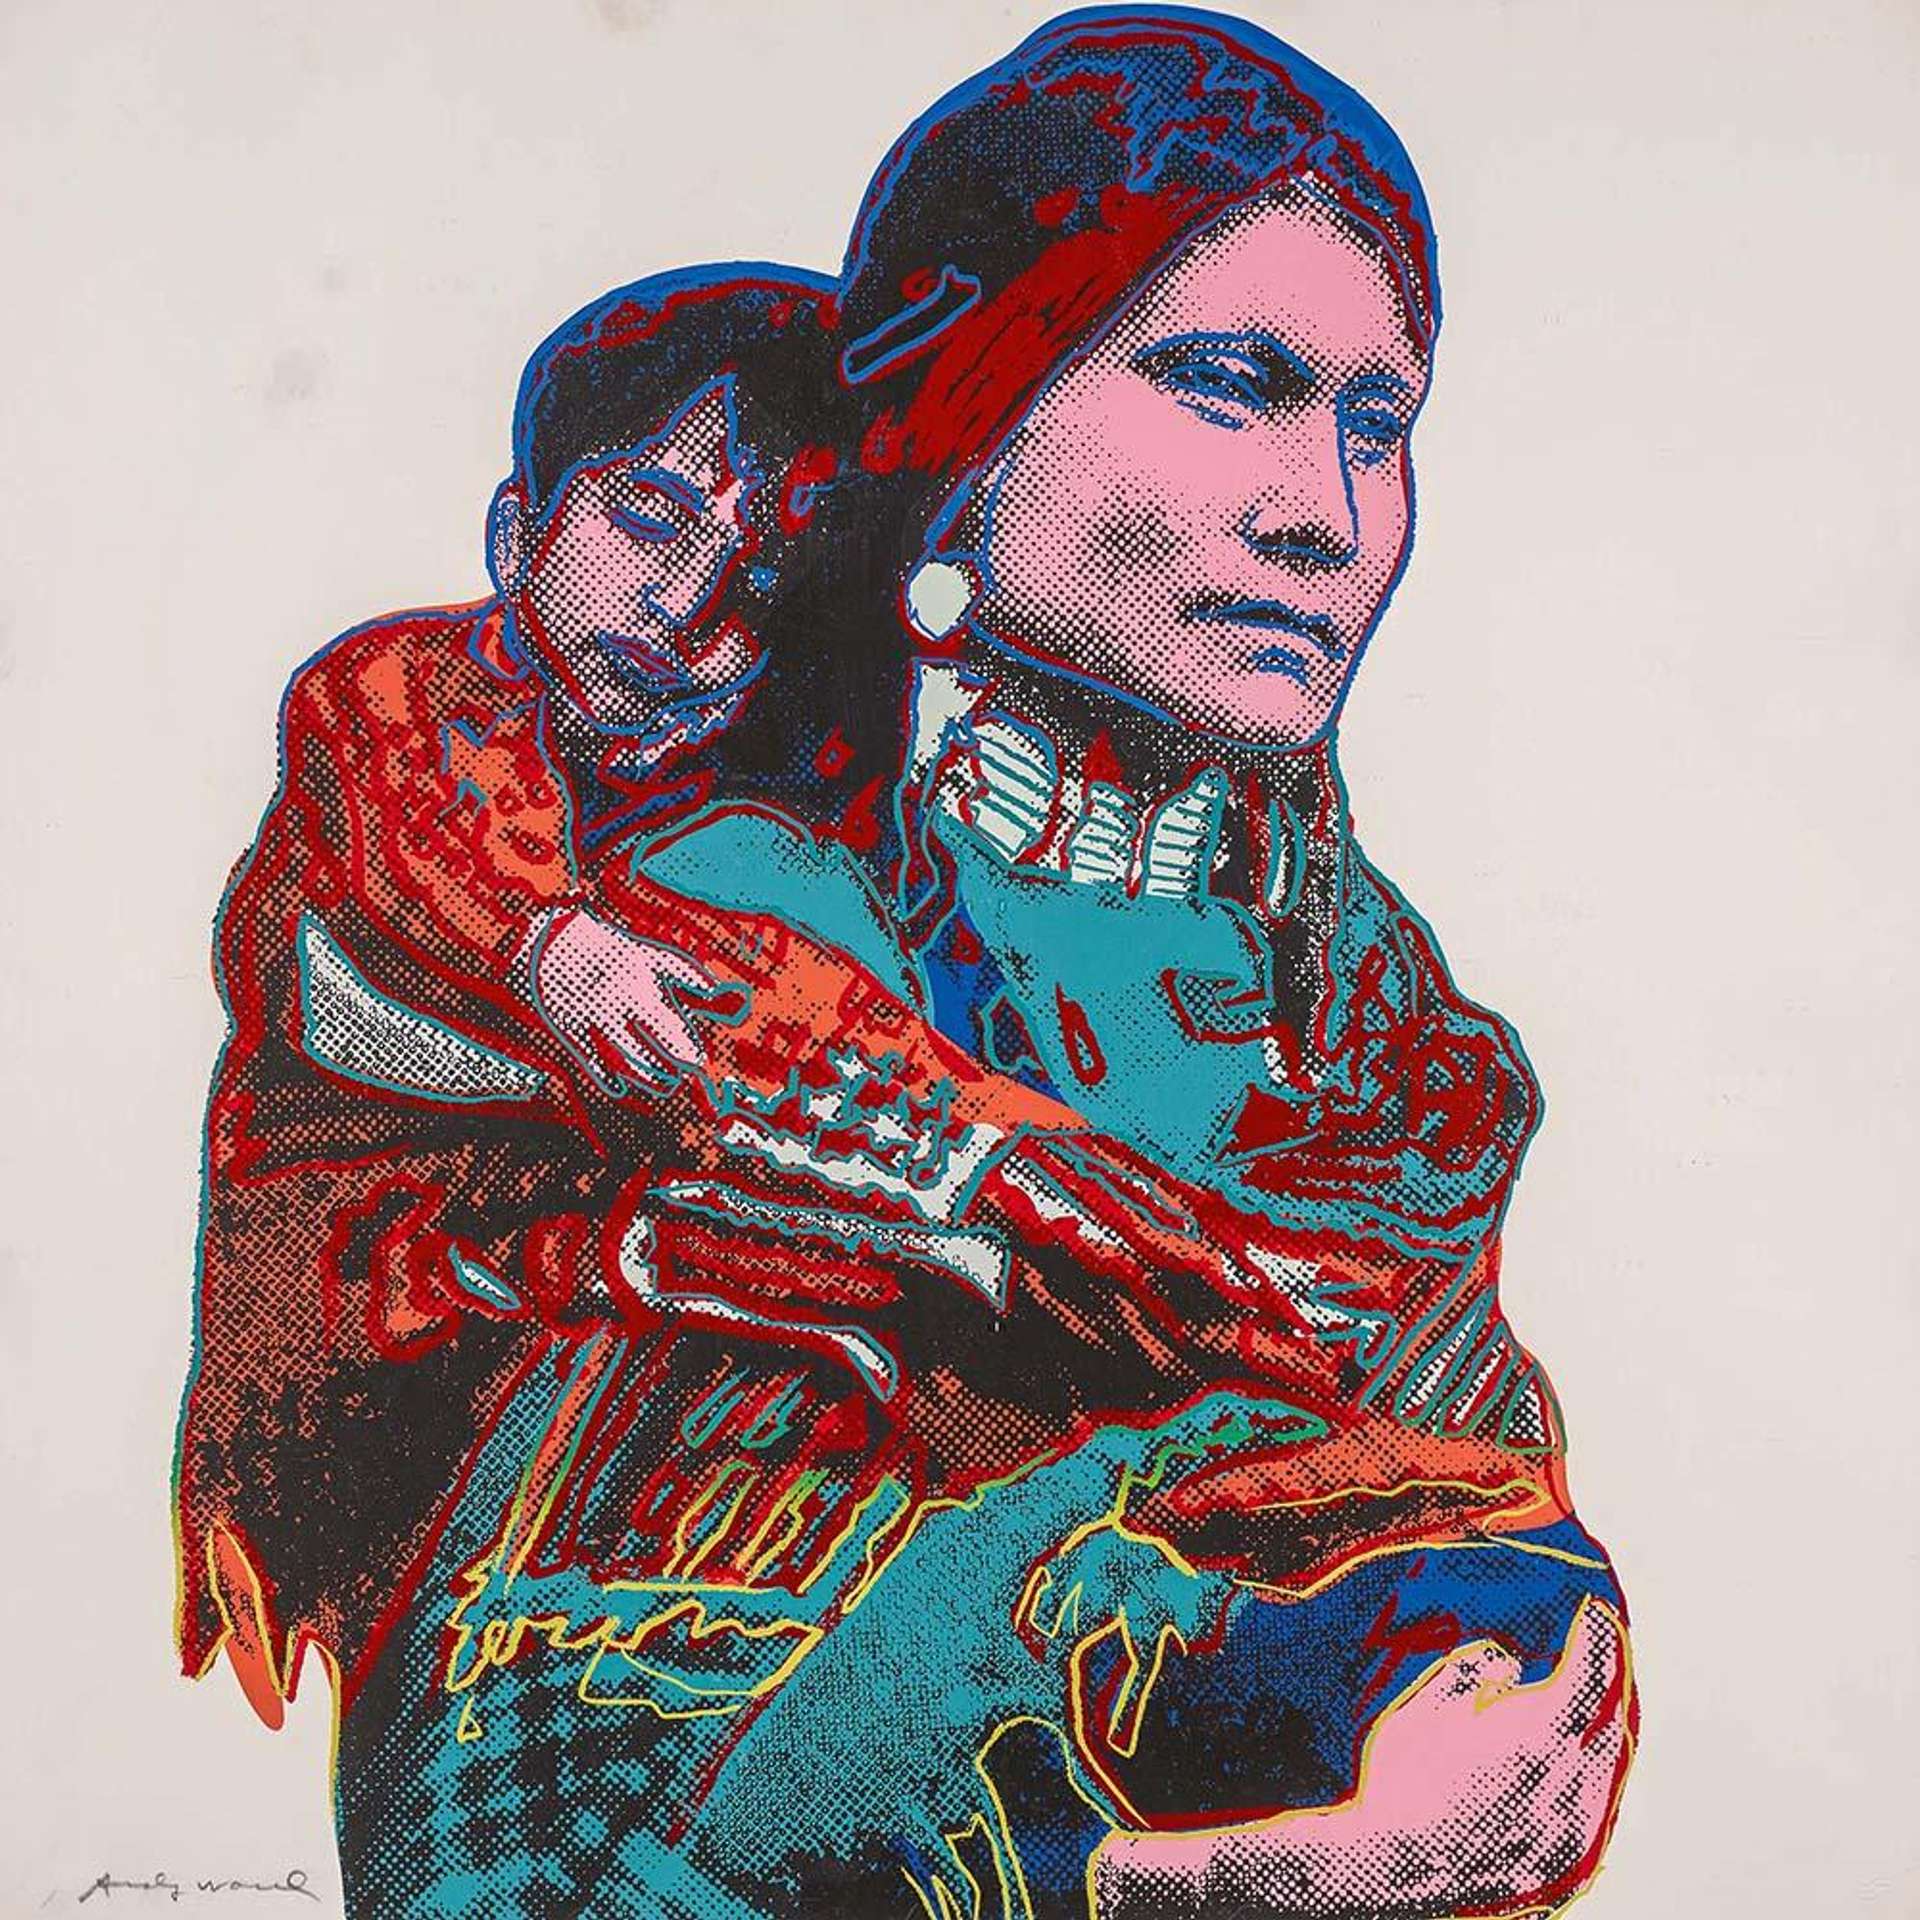 A screenprint by Andy Warhol depicting a Native American mother and child in bright colours, set against a white background